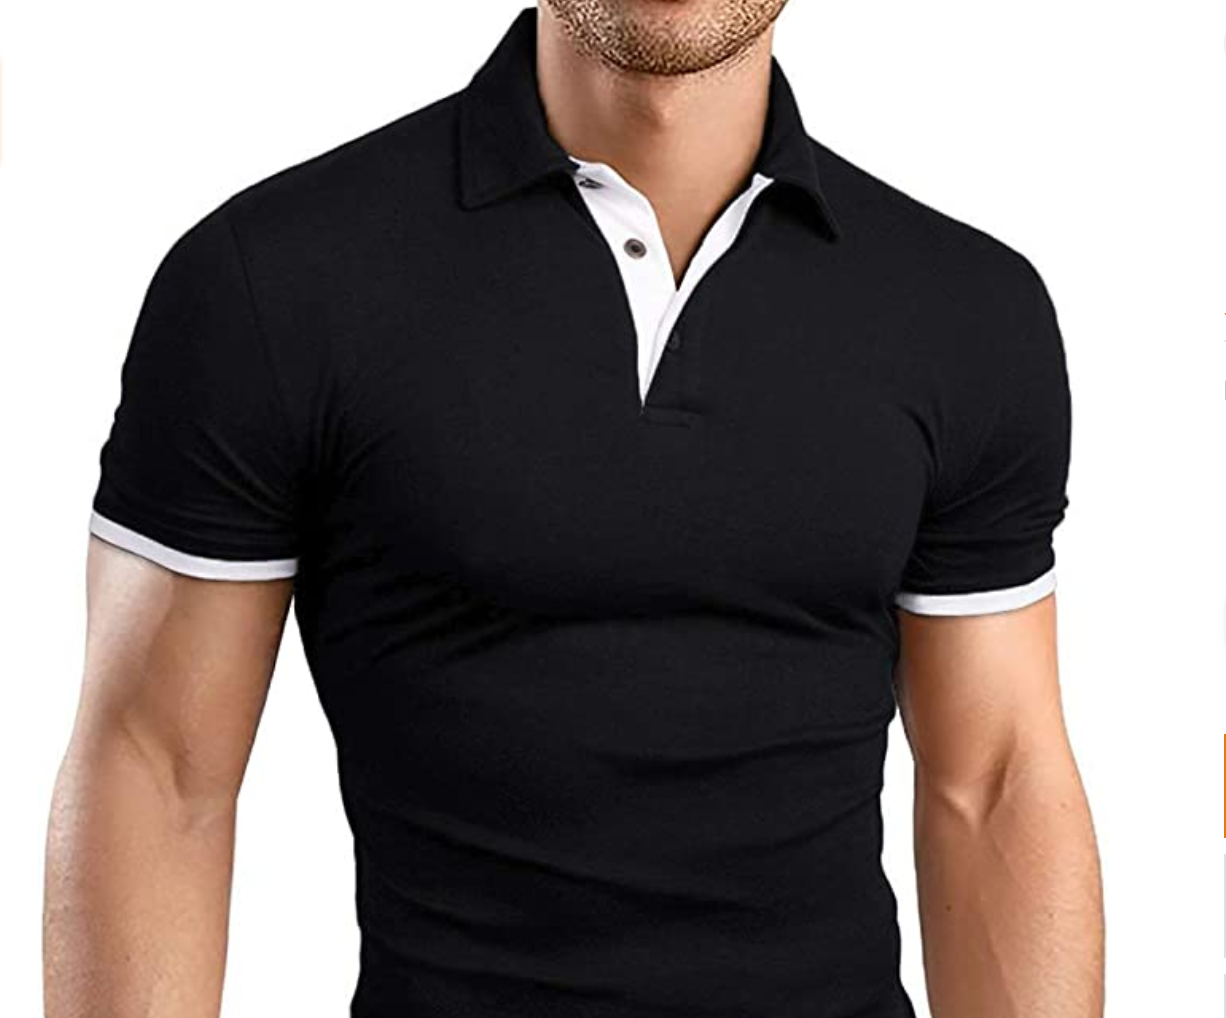 10 Best Polos for Short Guys in 2022 That Will Make You Look Gorgeous